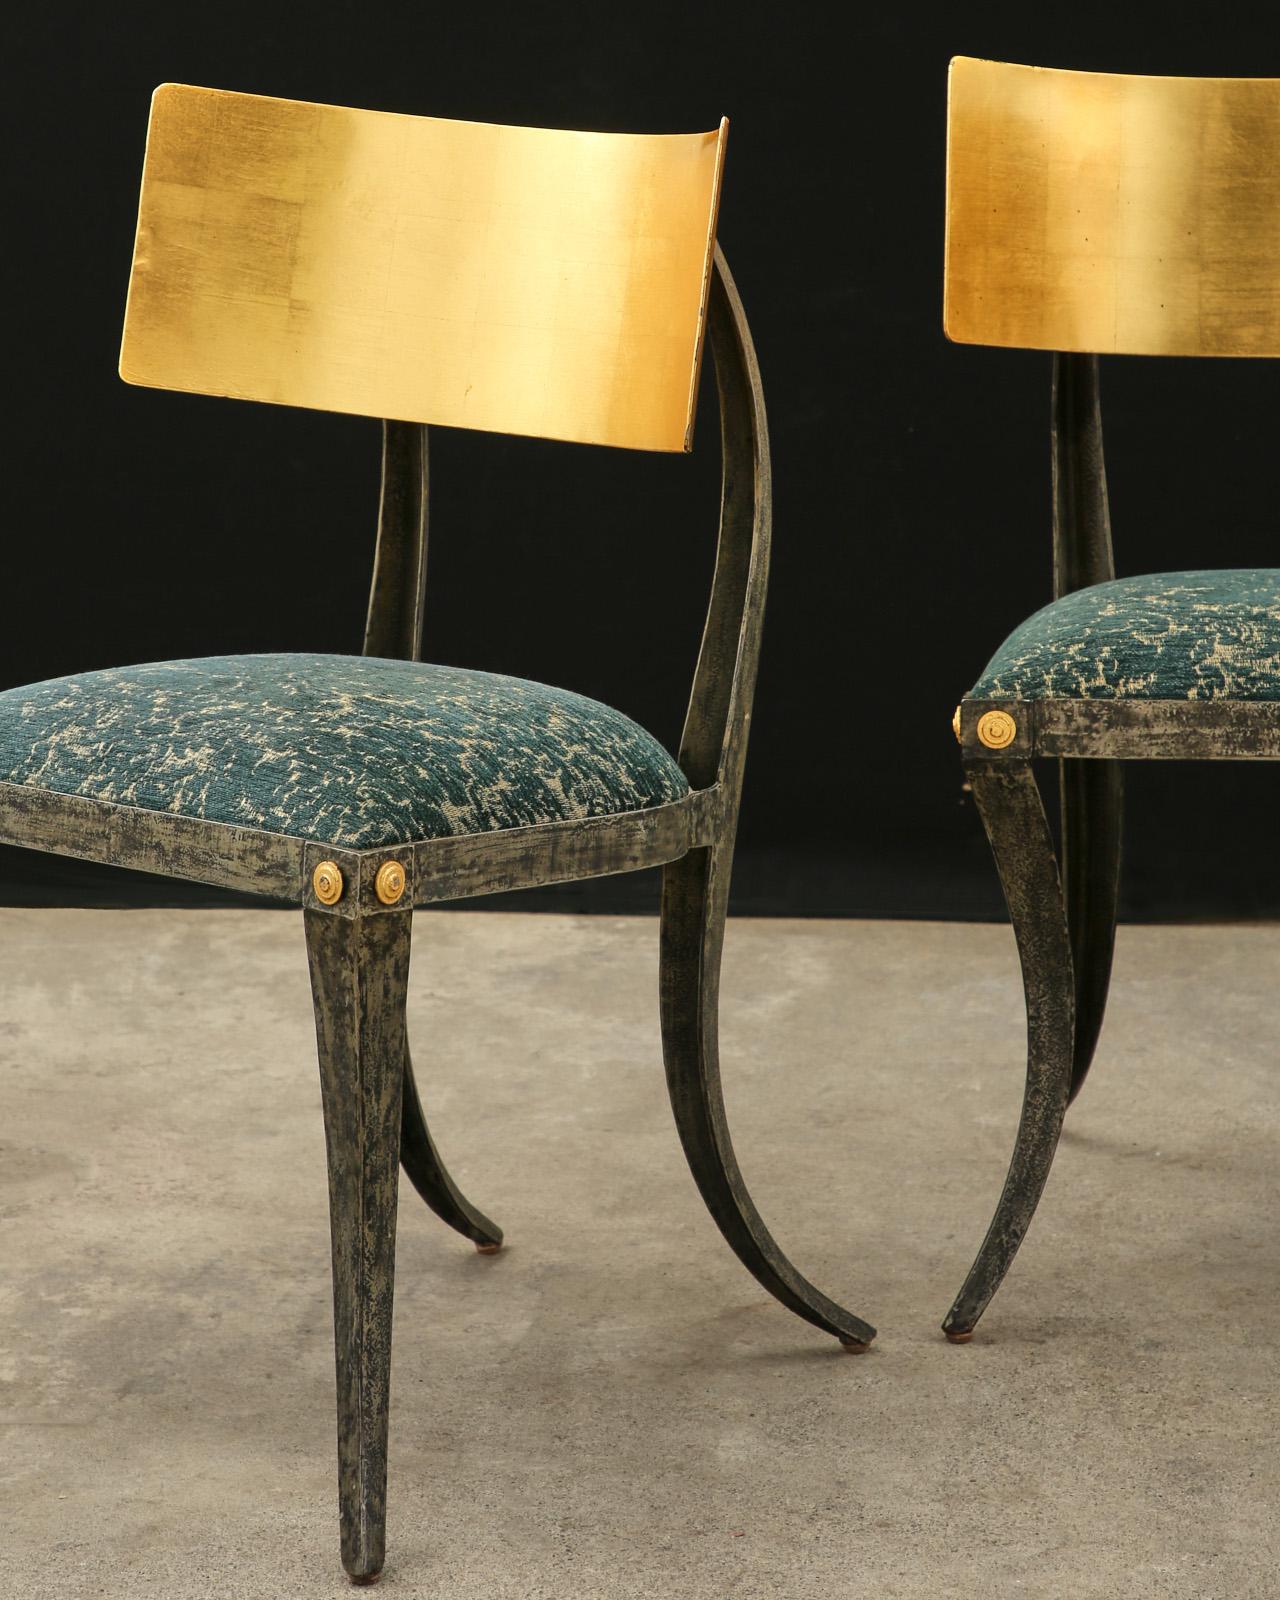 Dramatic pair of klismos chairs designed by Ched Berenguer-Topacio. The sinuous chairs feature a wrought iron frame with a large curved tablet back embellished with gold leaf squares. The gracefully curved legs support an upholstered seat. Classic